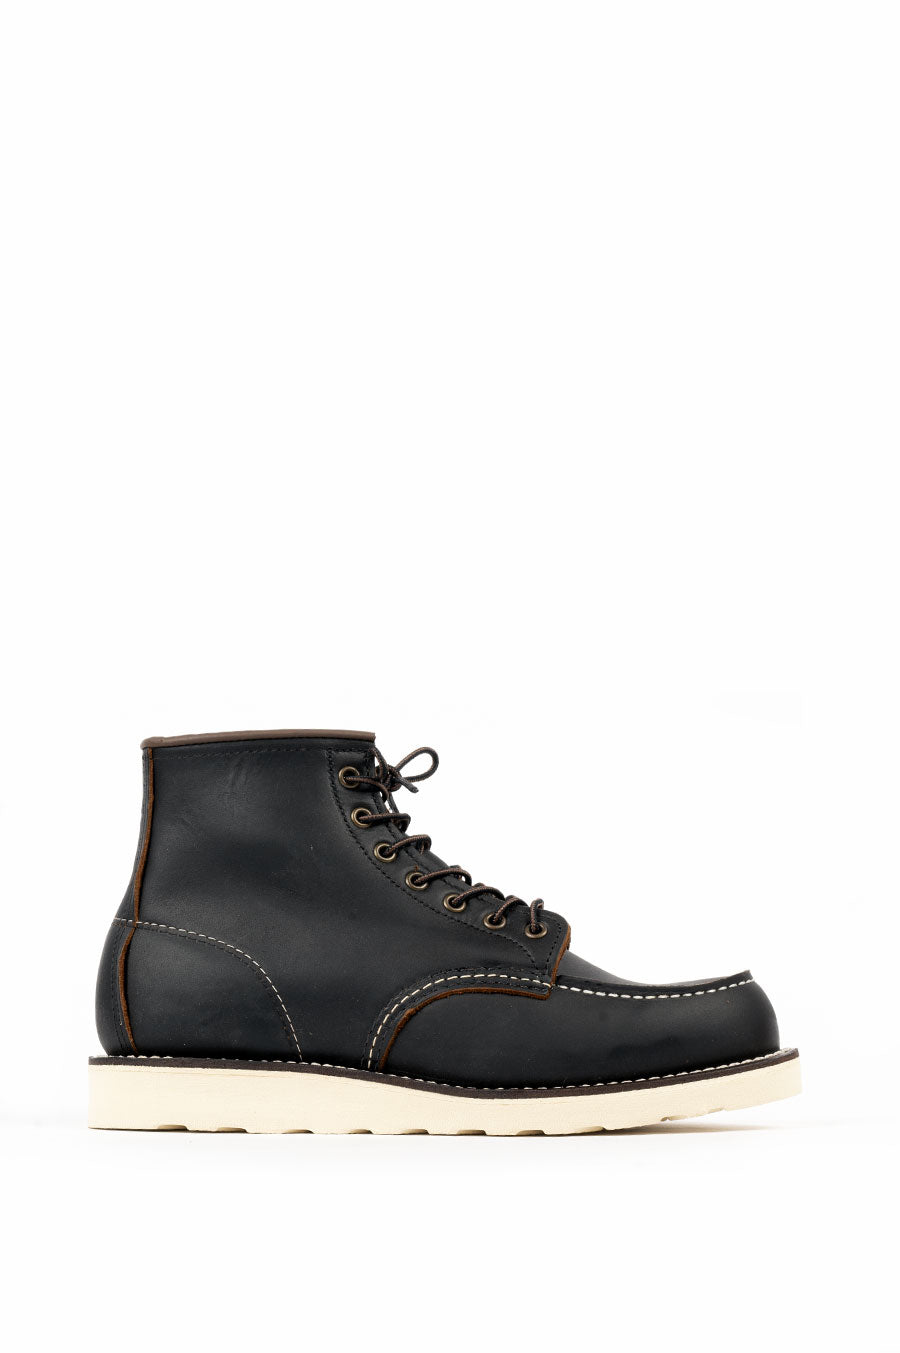 RED WING 6" BOOT CLASSIC MOC BLACK